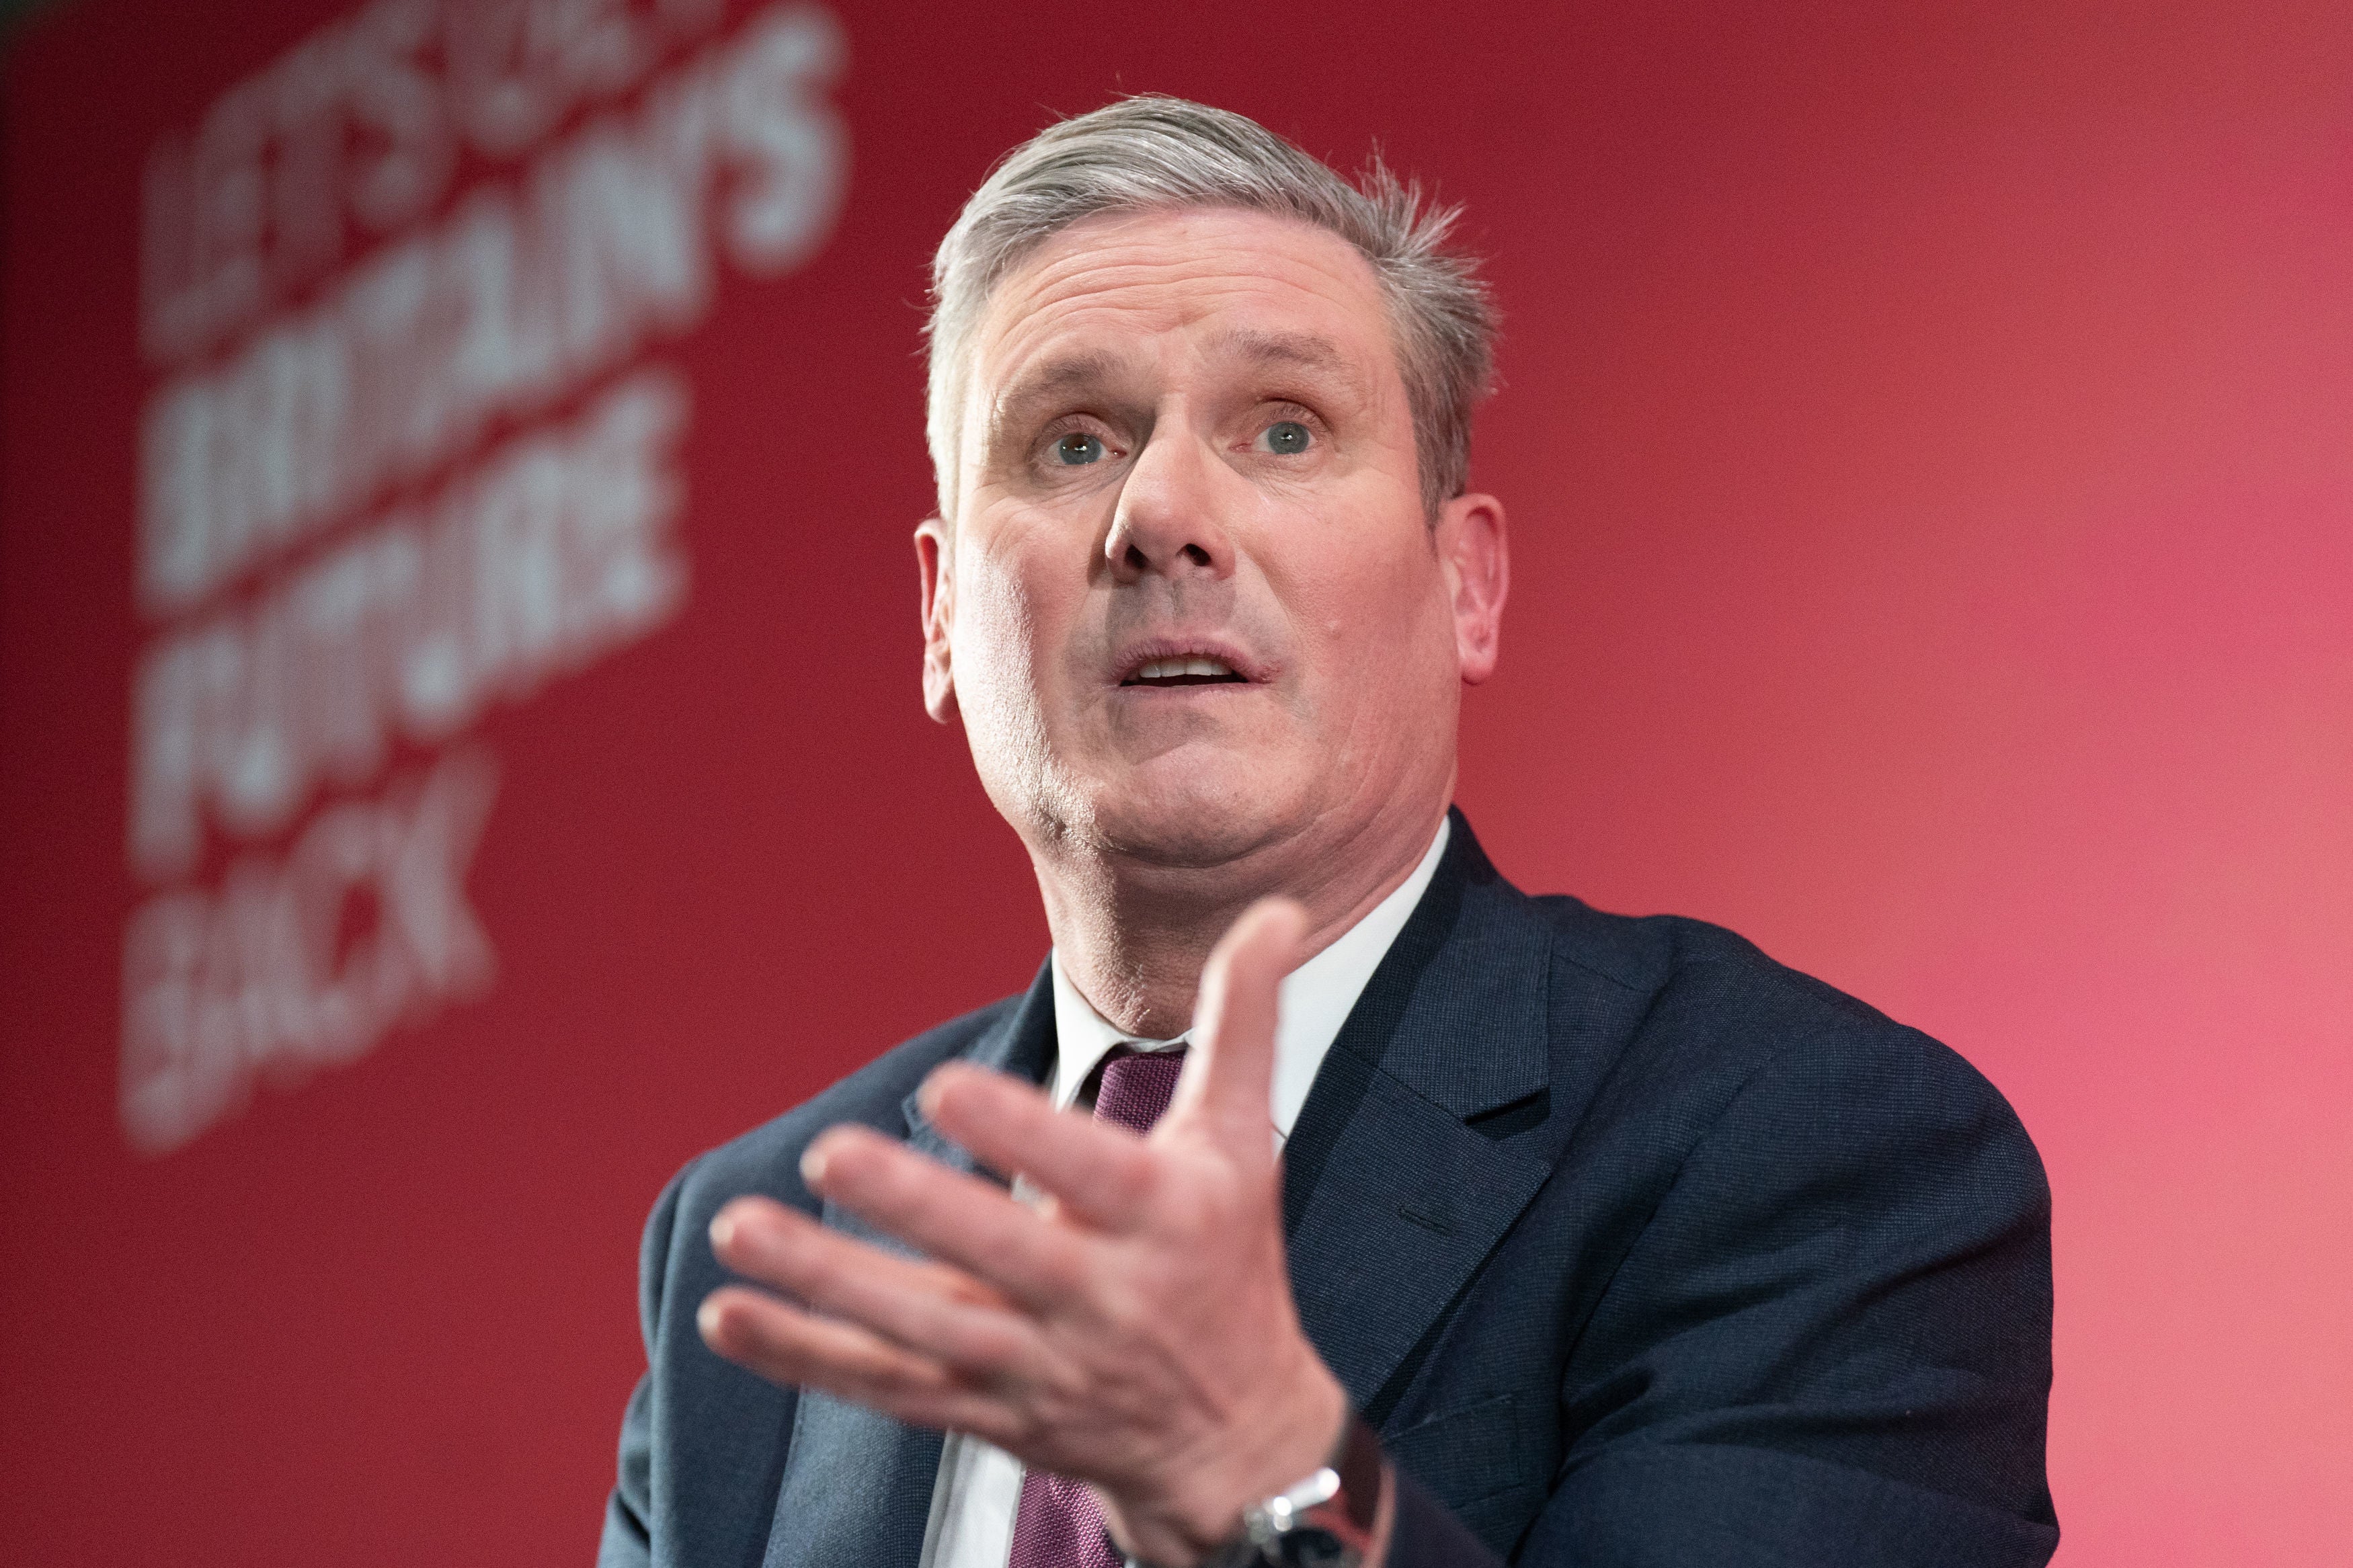 Although Labour is not short of micro policies, his internal critics worry that a Starmer government would lack a mandate for radical change